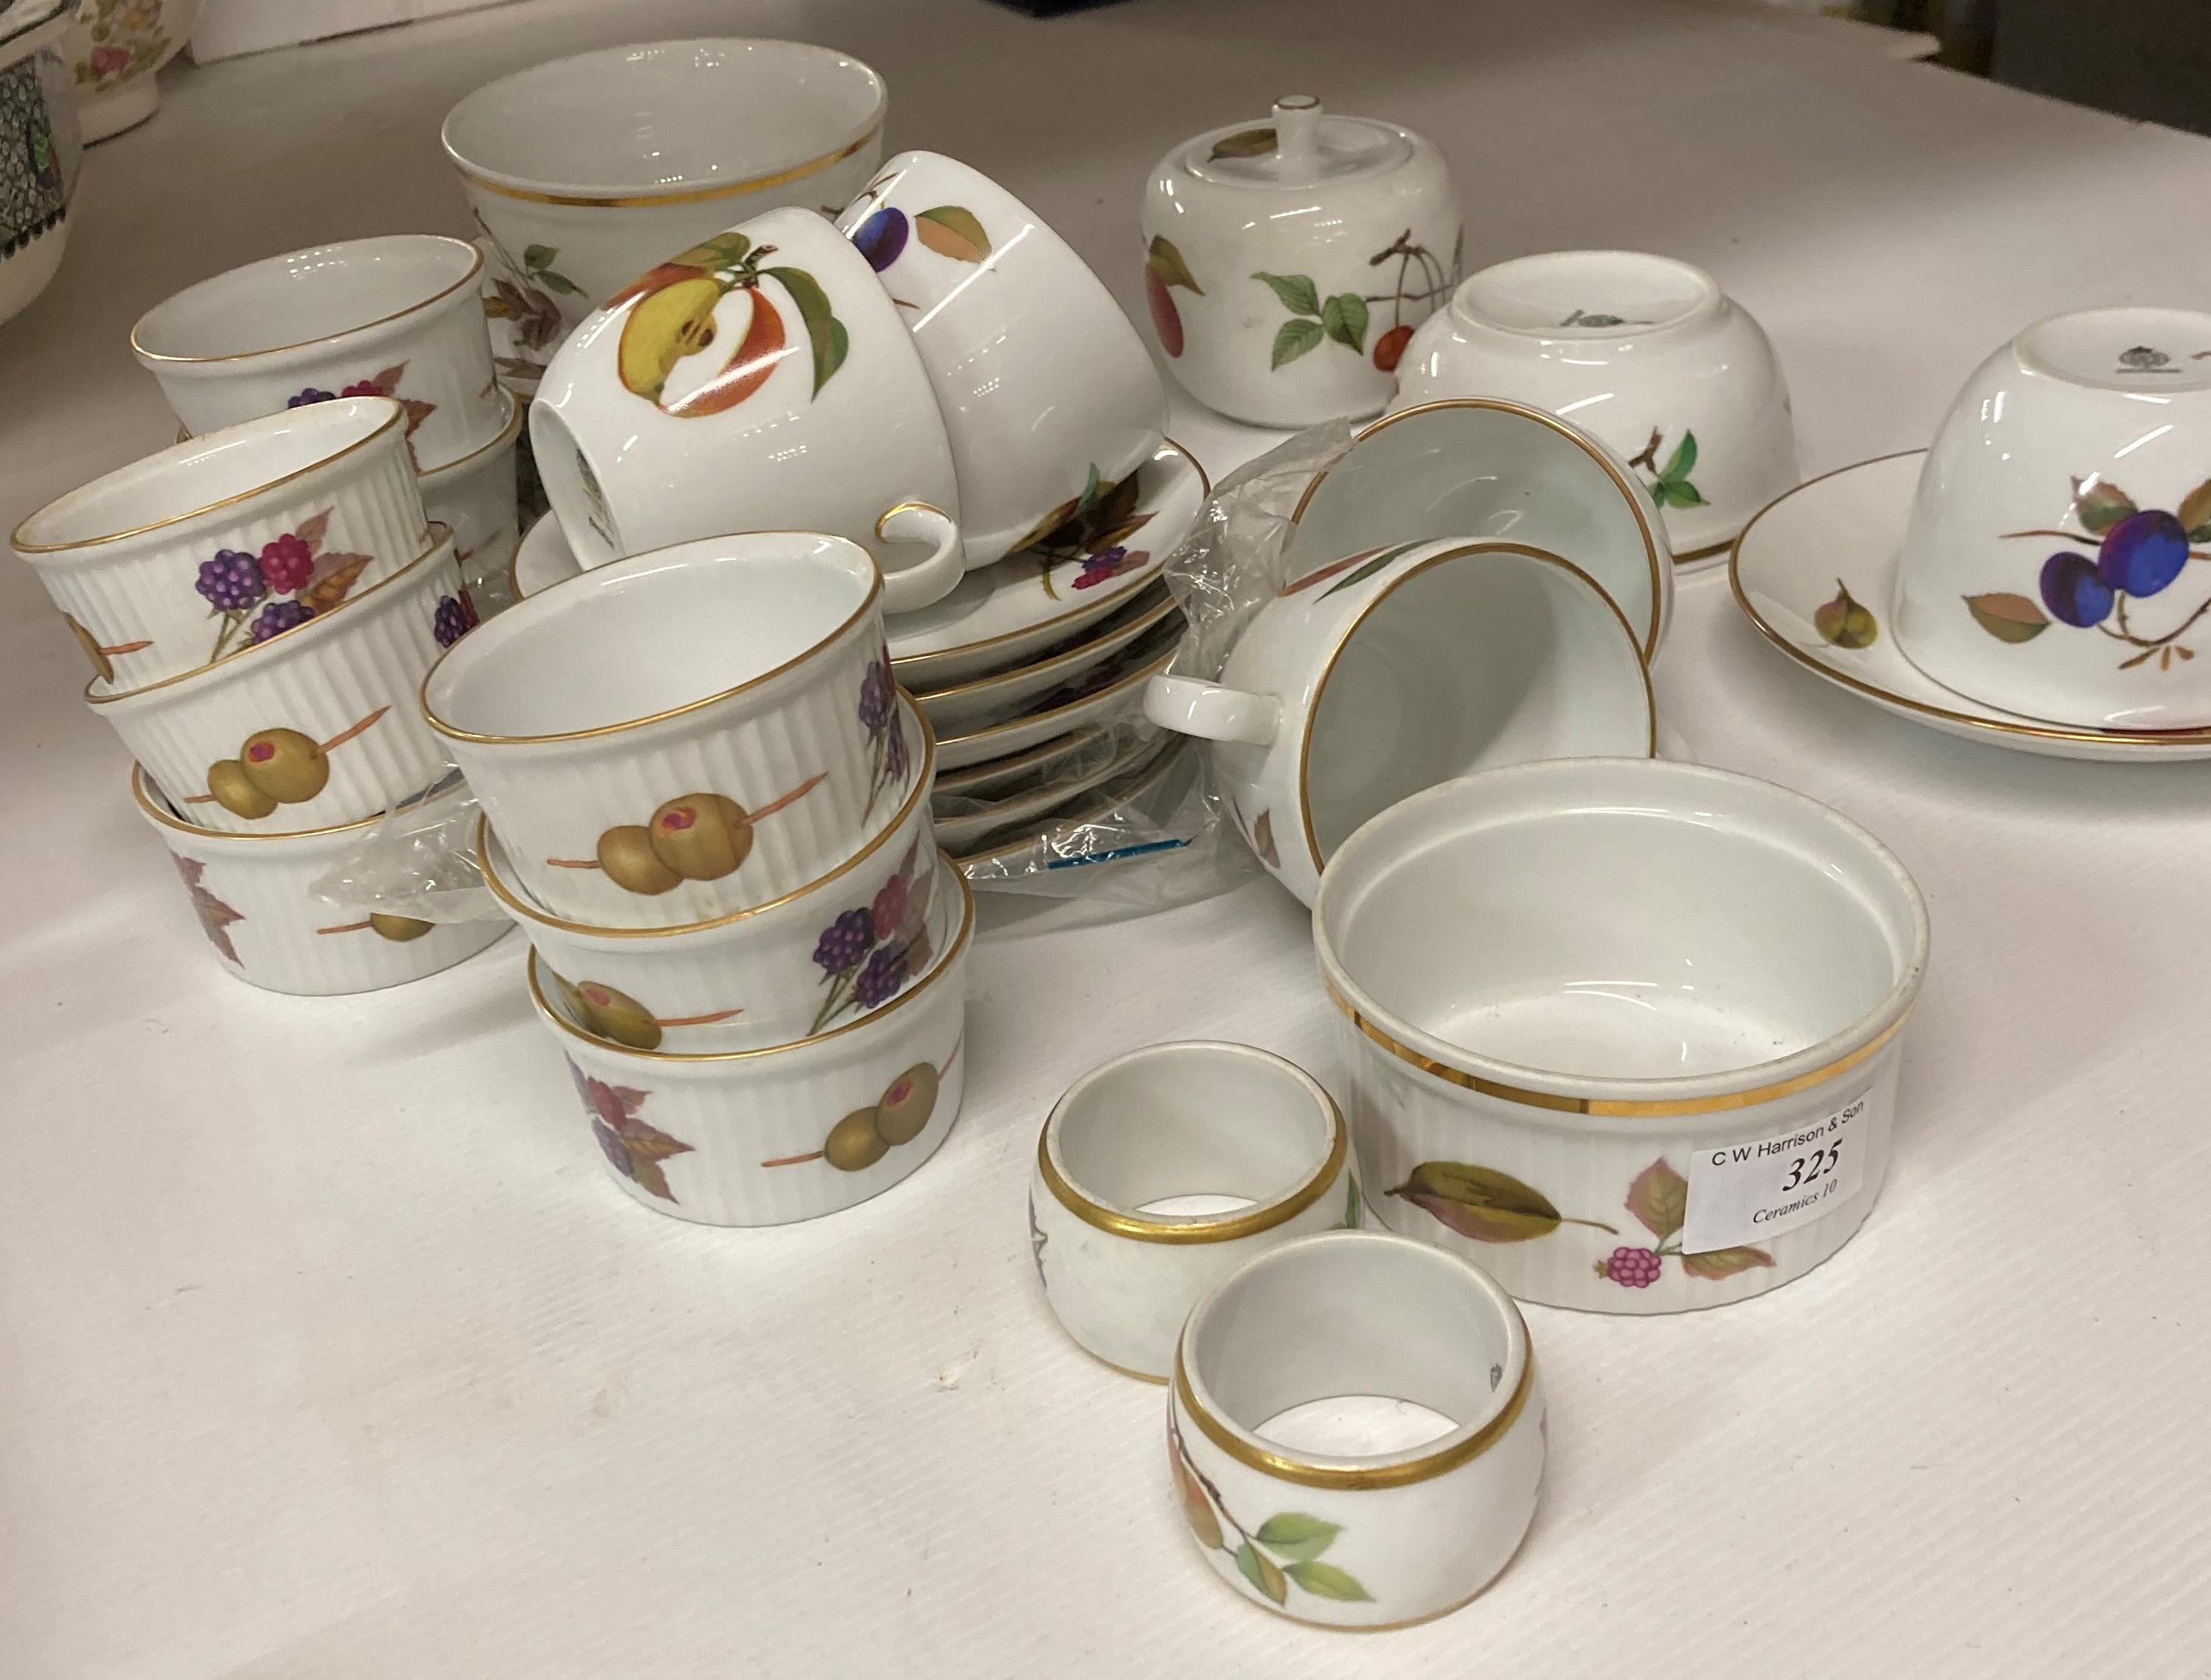 Thirty-five pieces of Royal Worcester Evesham porcelain tea service - cups, saucers,